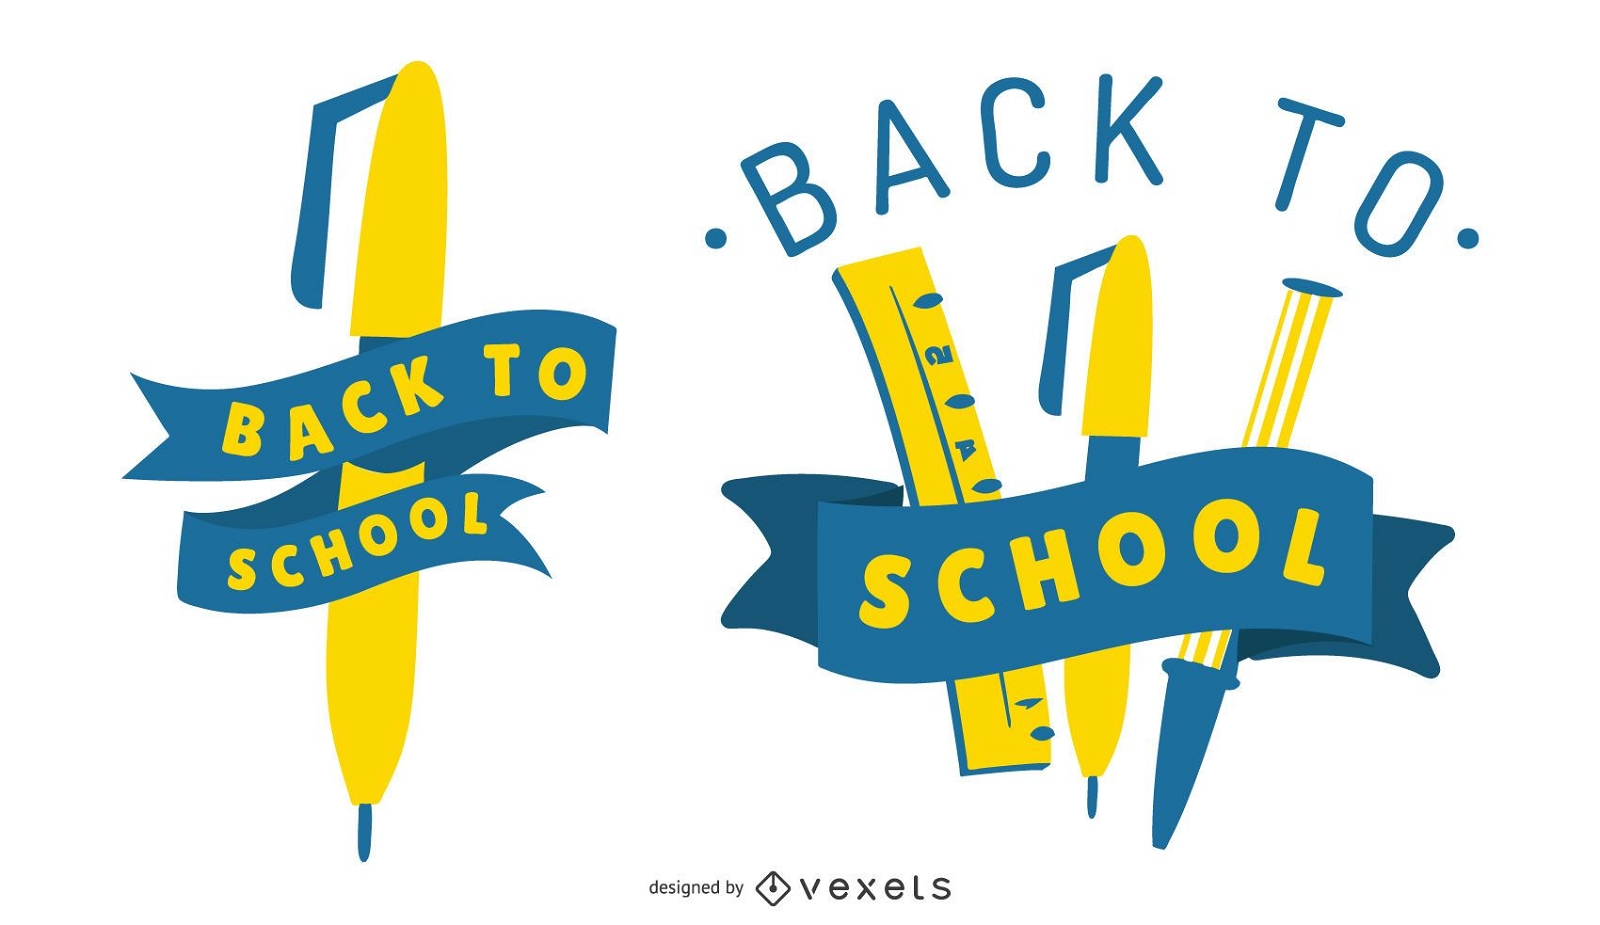 ✓ Back To School